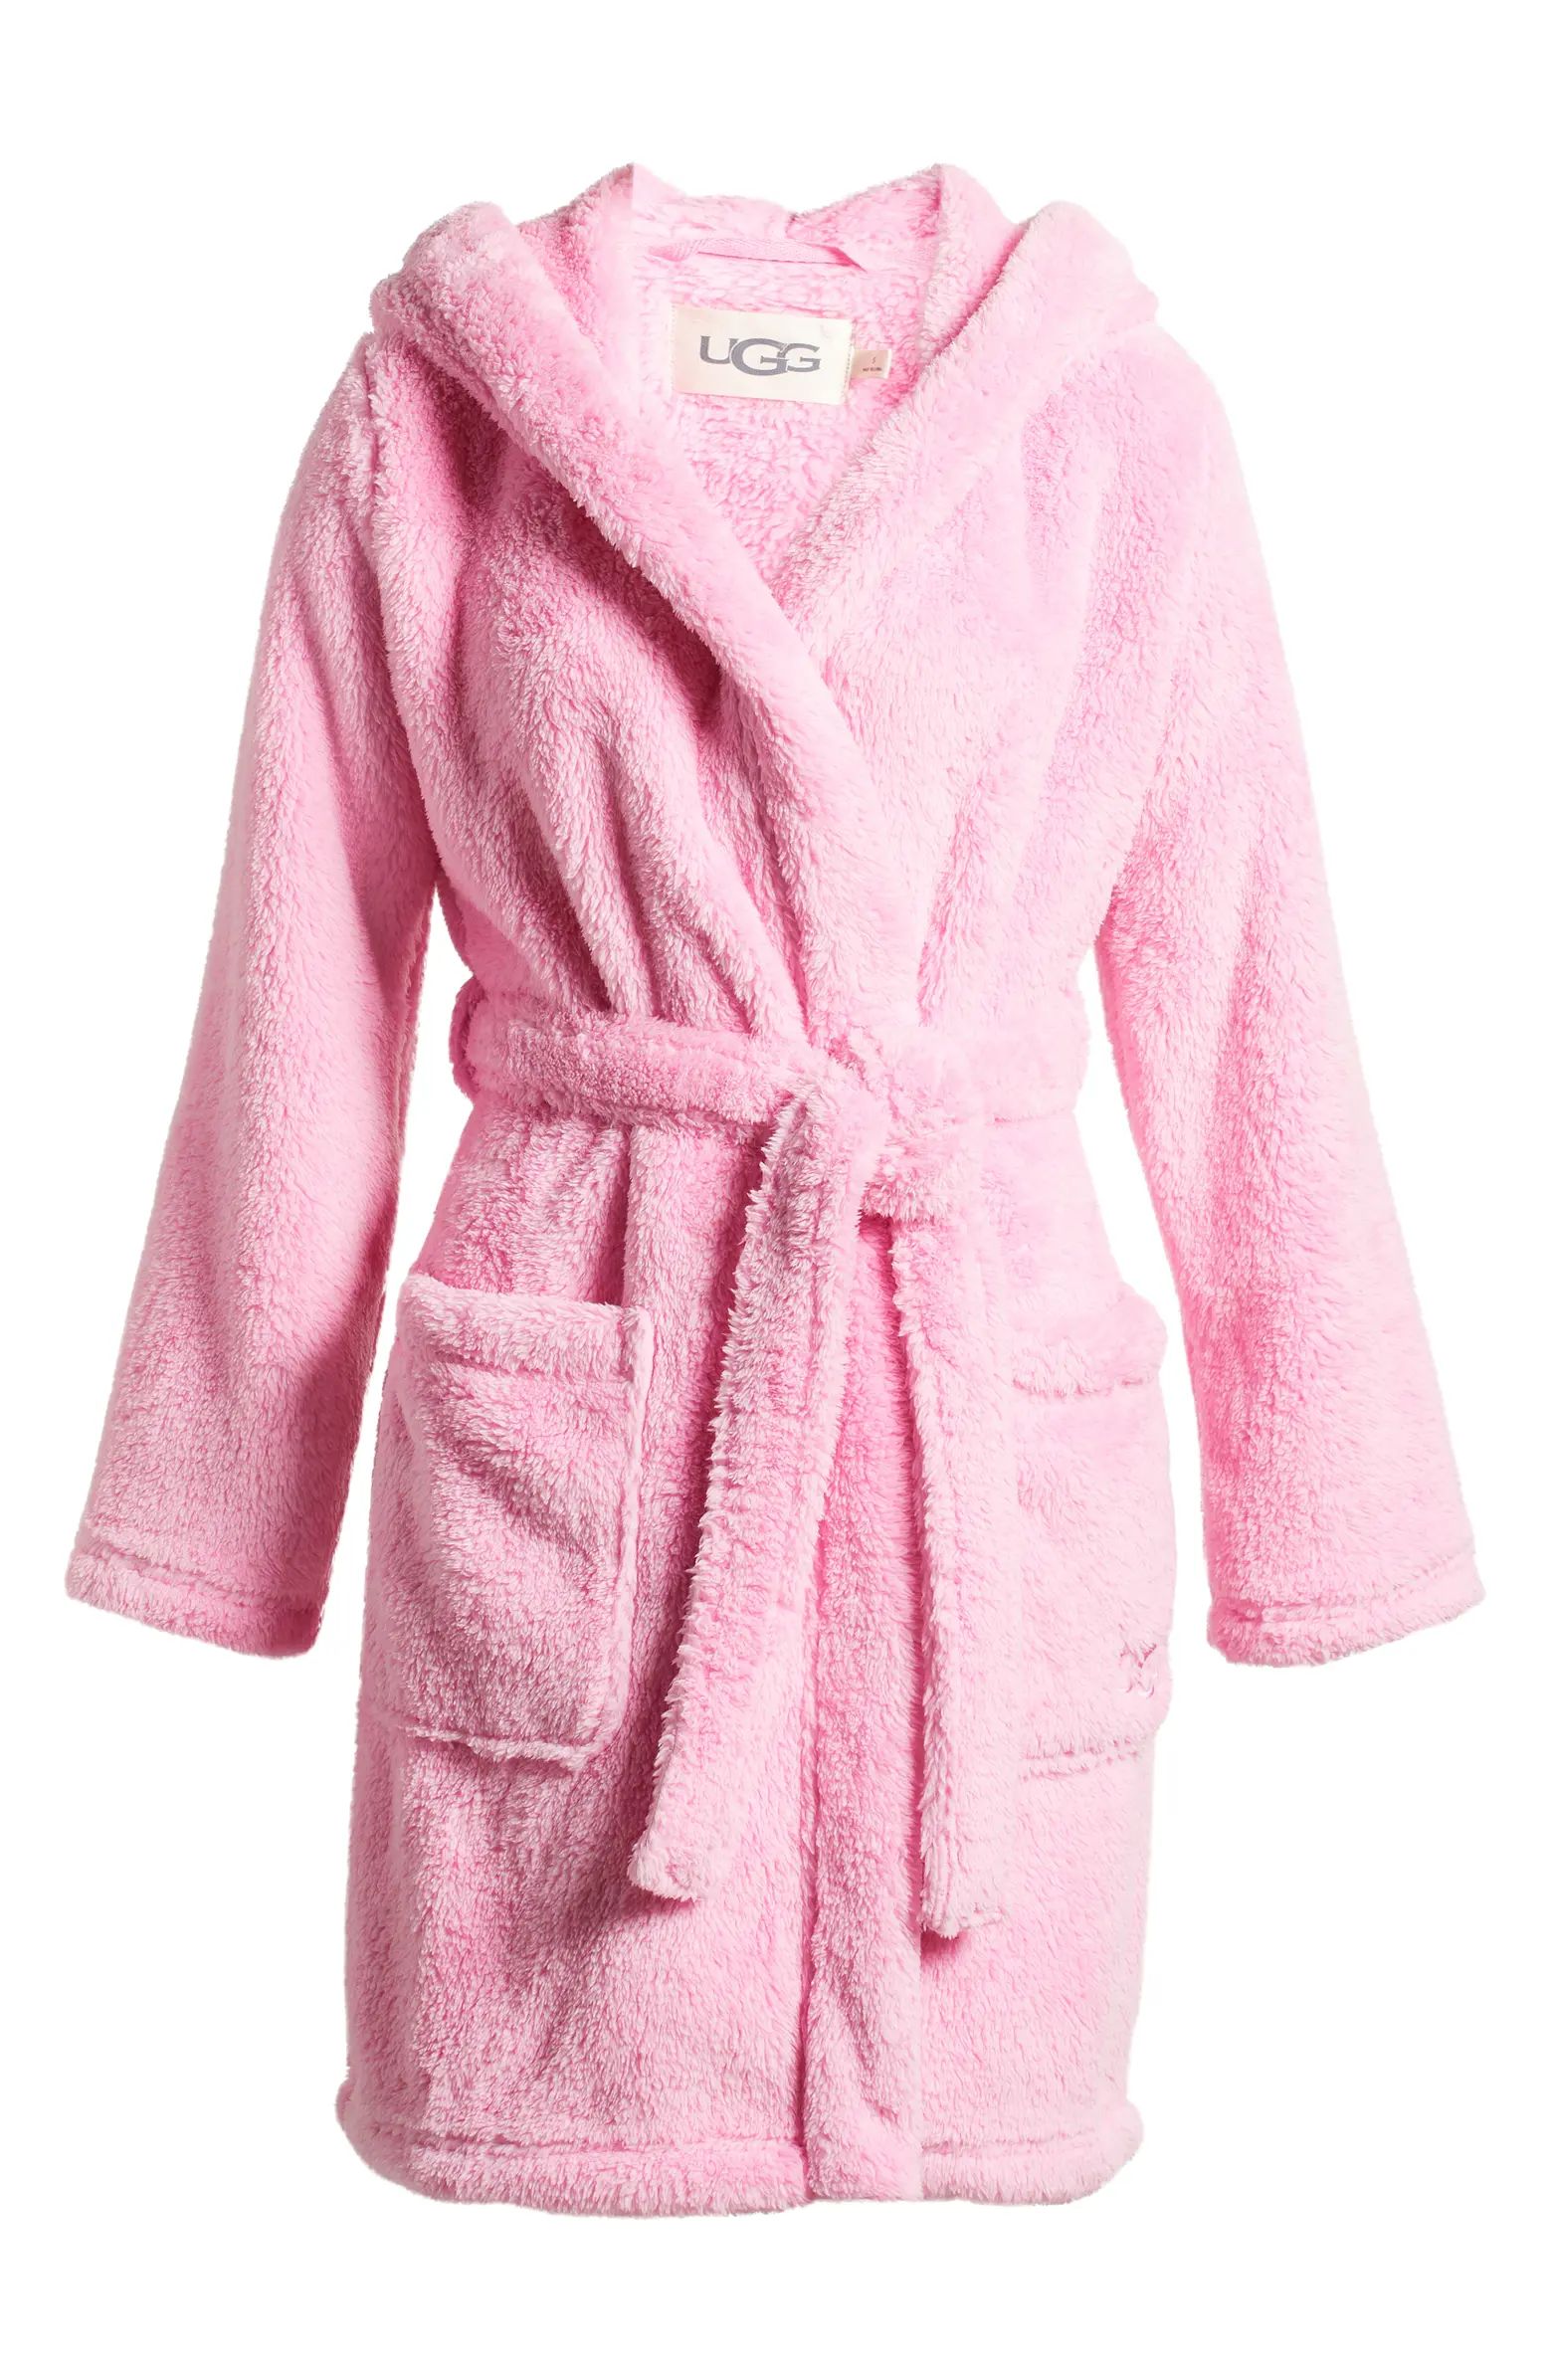 Aarti Faux Shearling Hooded Robe | Nordstrom